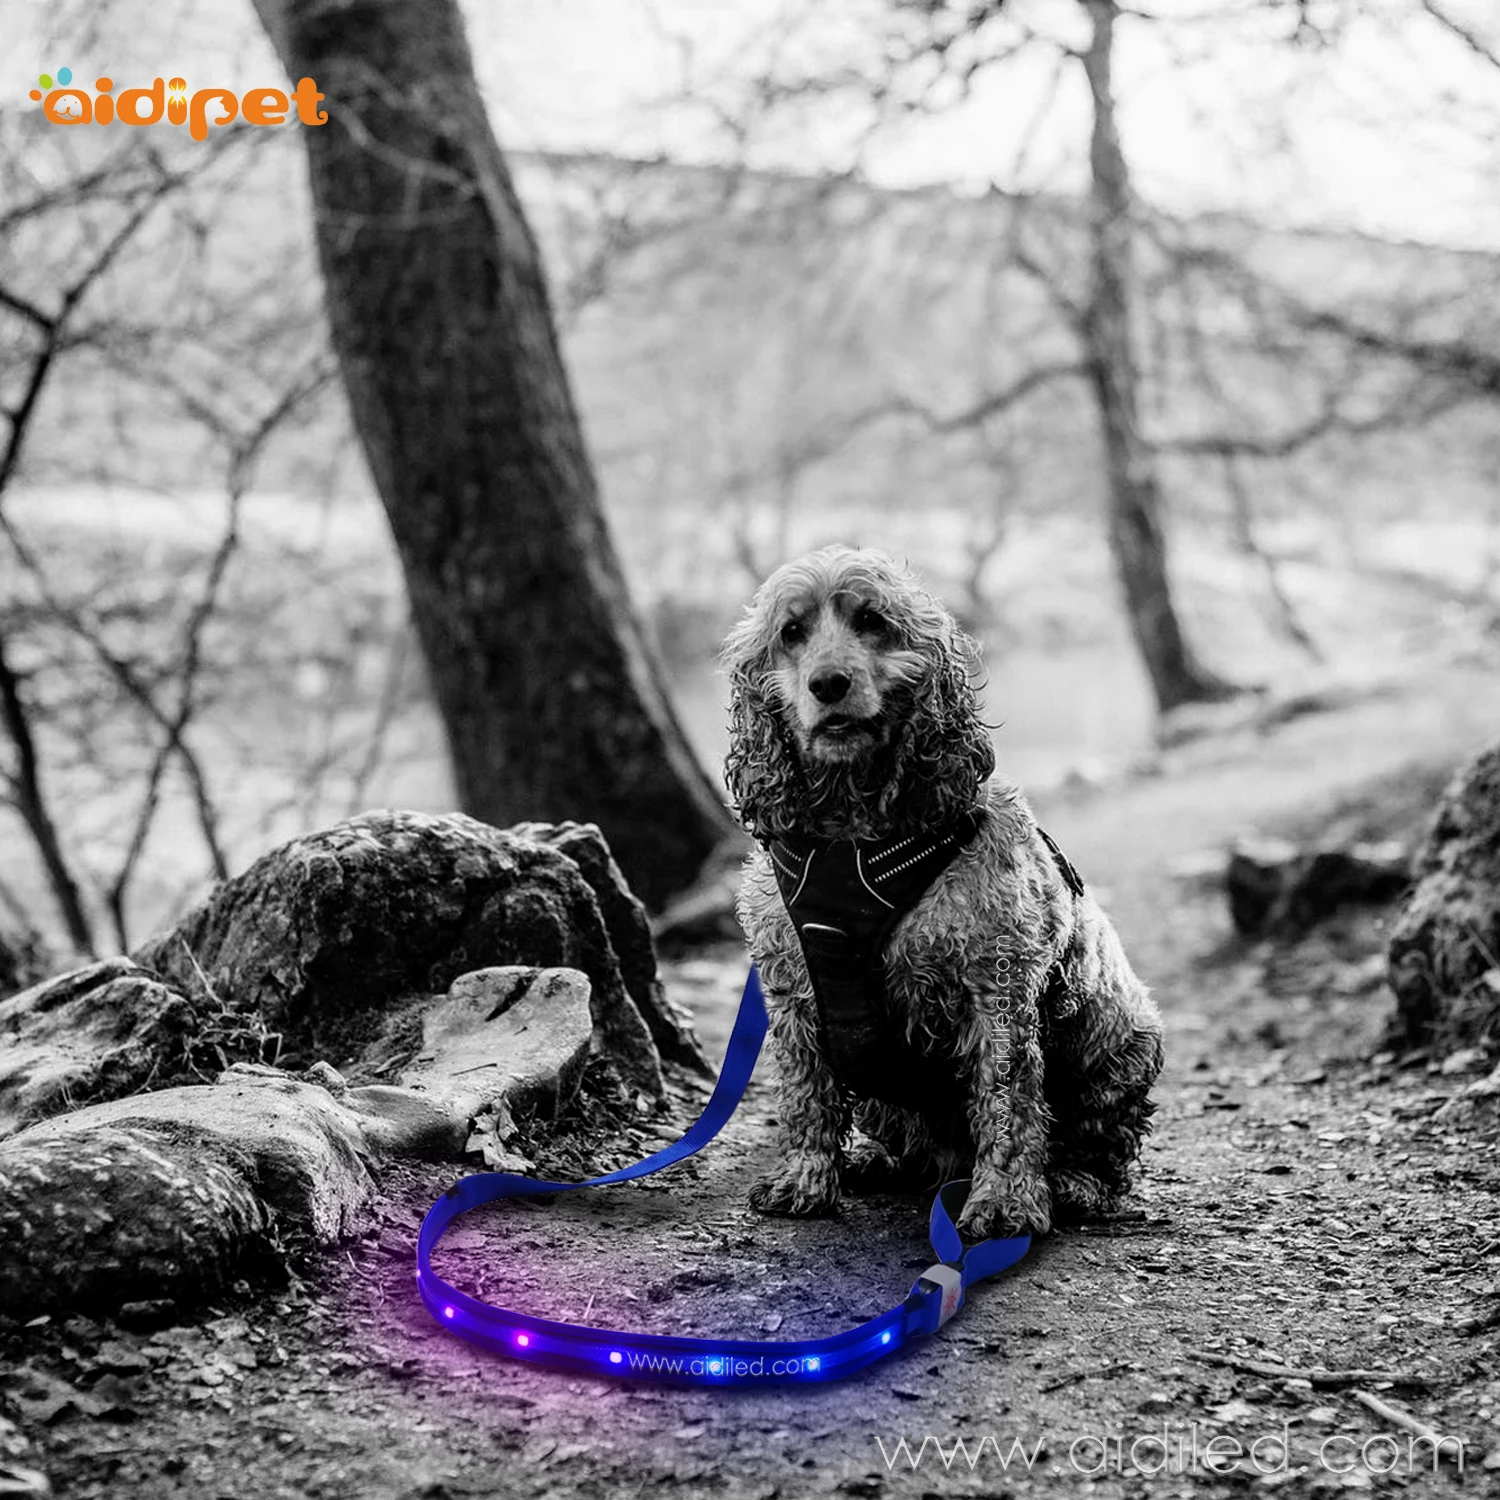 RGB Blink Colorful Led Pet Leash for Dogs Very Cool Pet Supplies Fish Silk Cover Light Up Lead 120cm Length